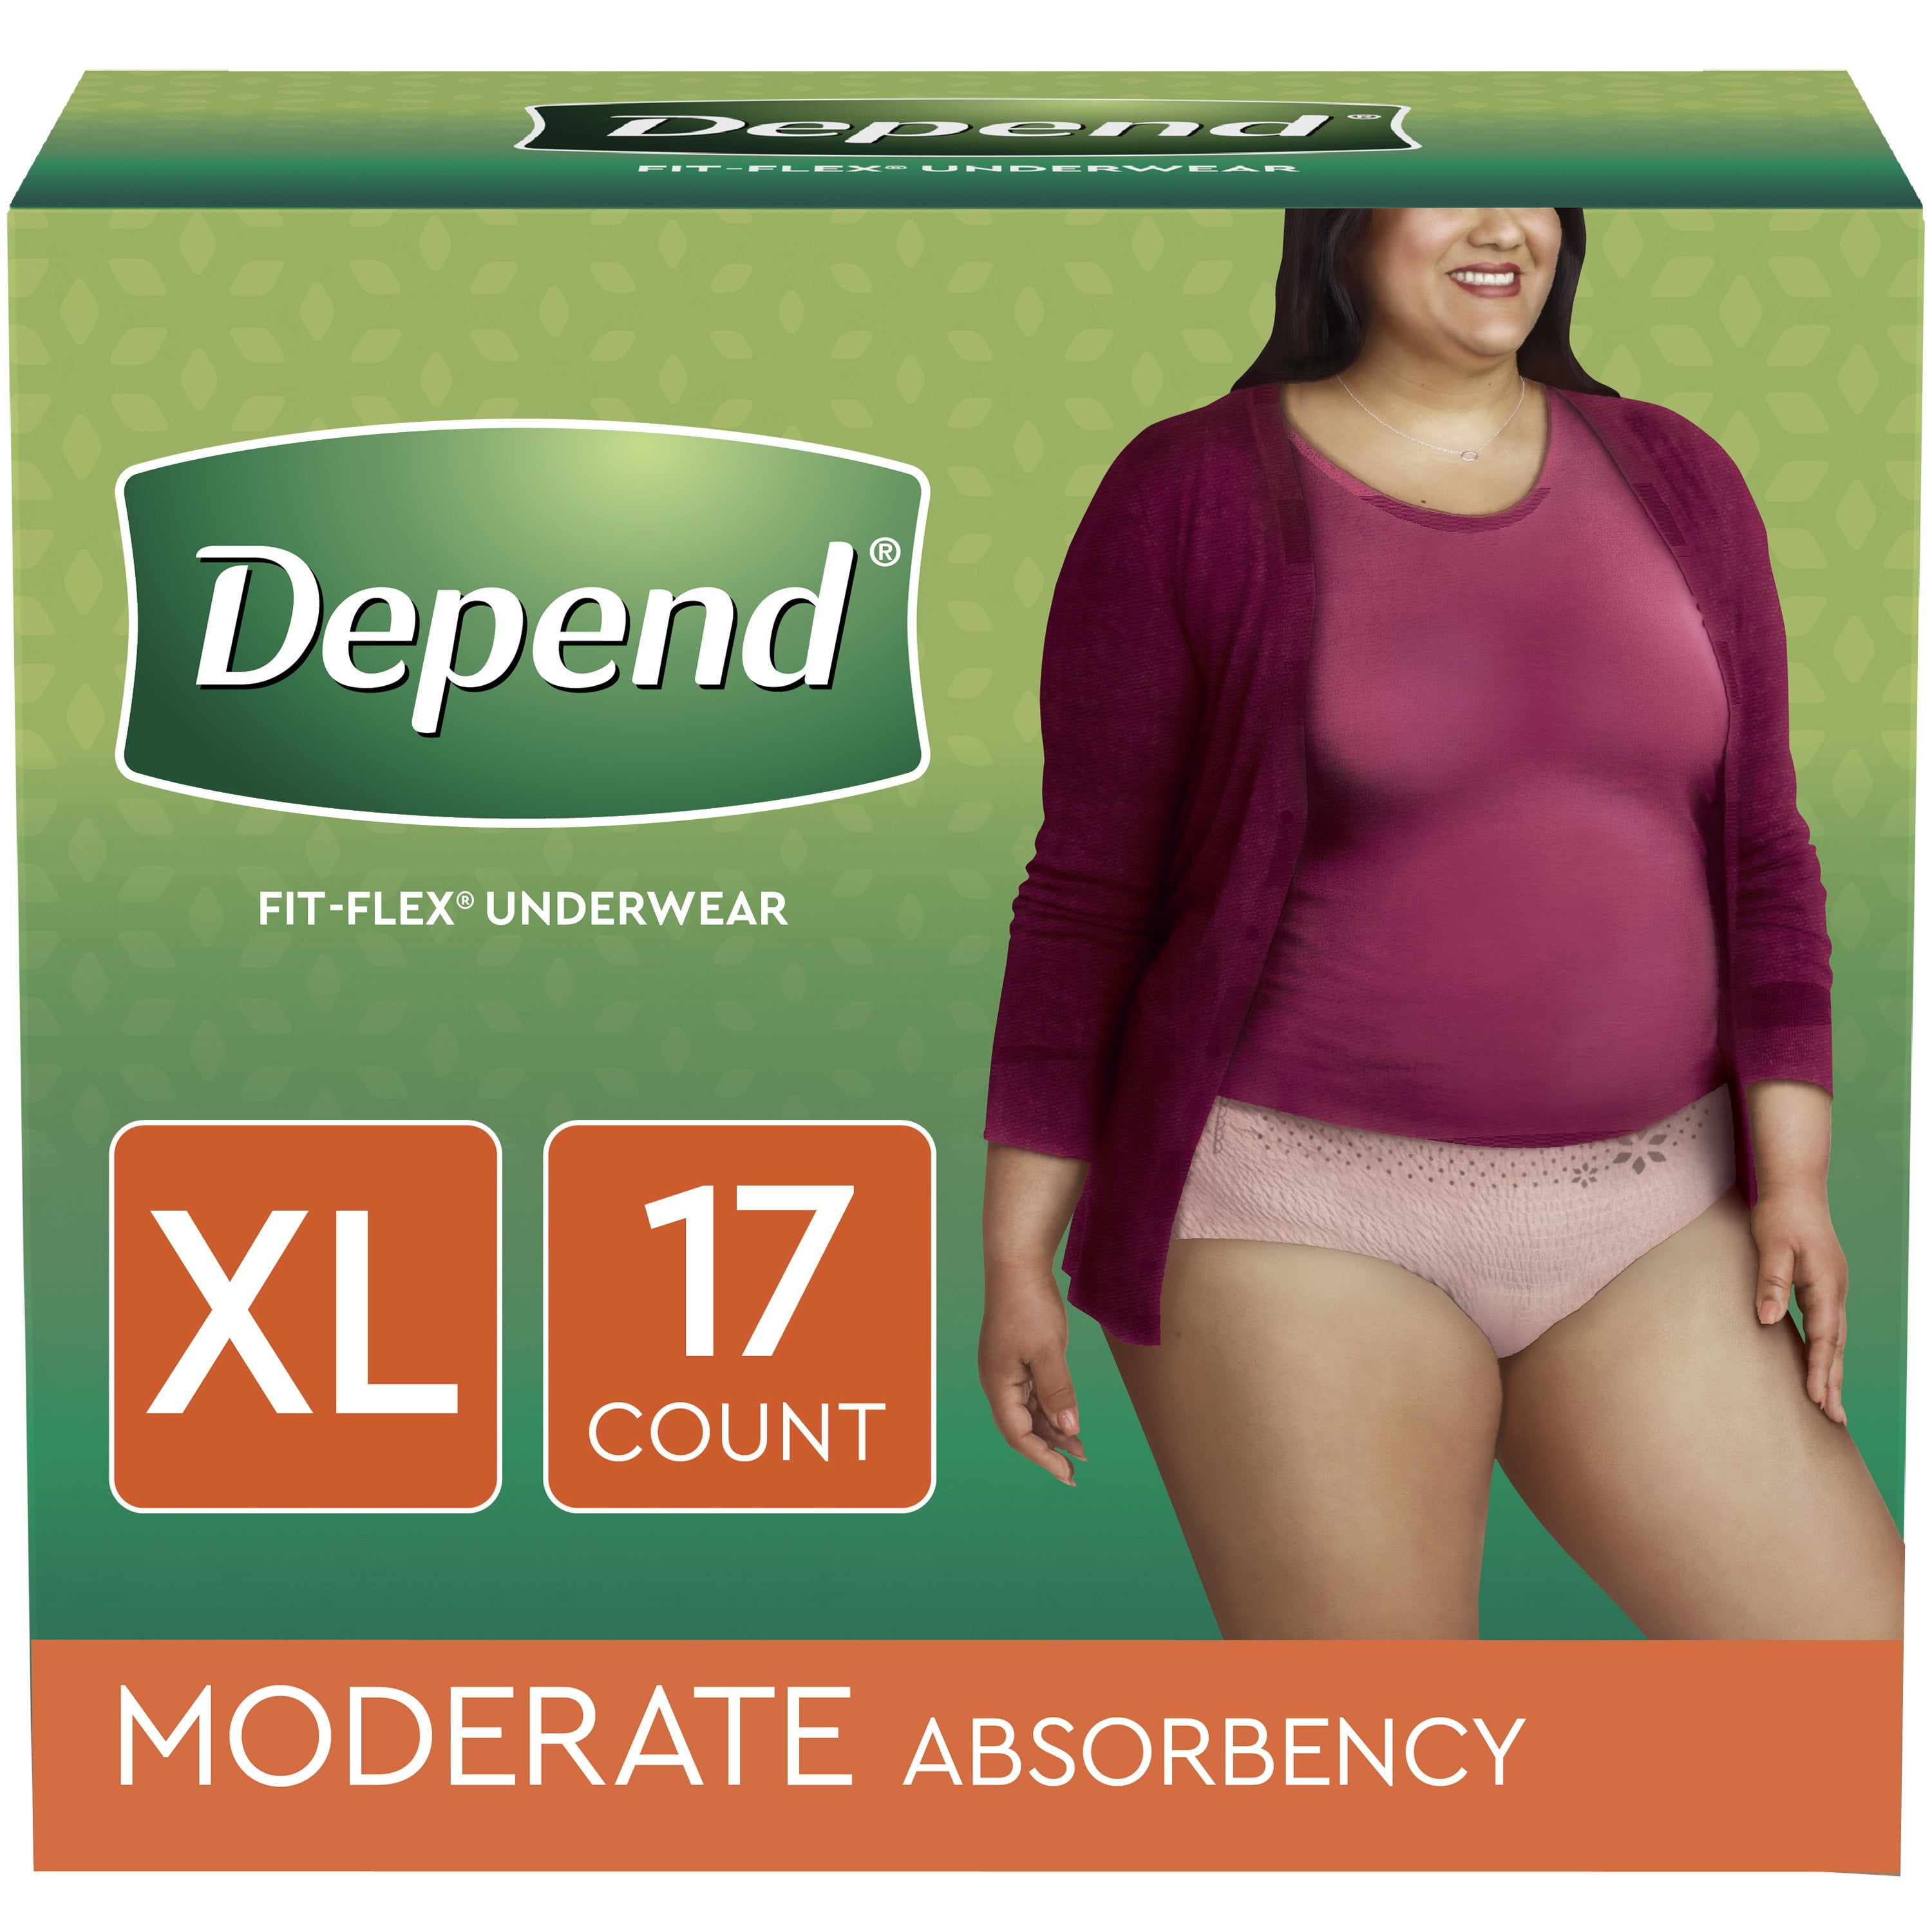 Depend FIT-FLEX Incontinence Underwear for Women, Moderate Absorbency, XL,  17 Ct